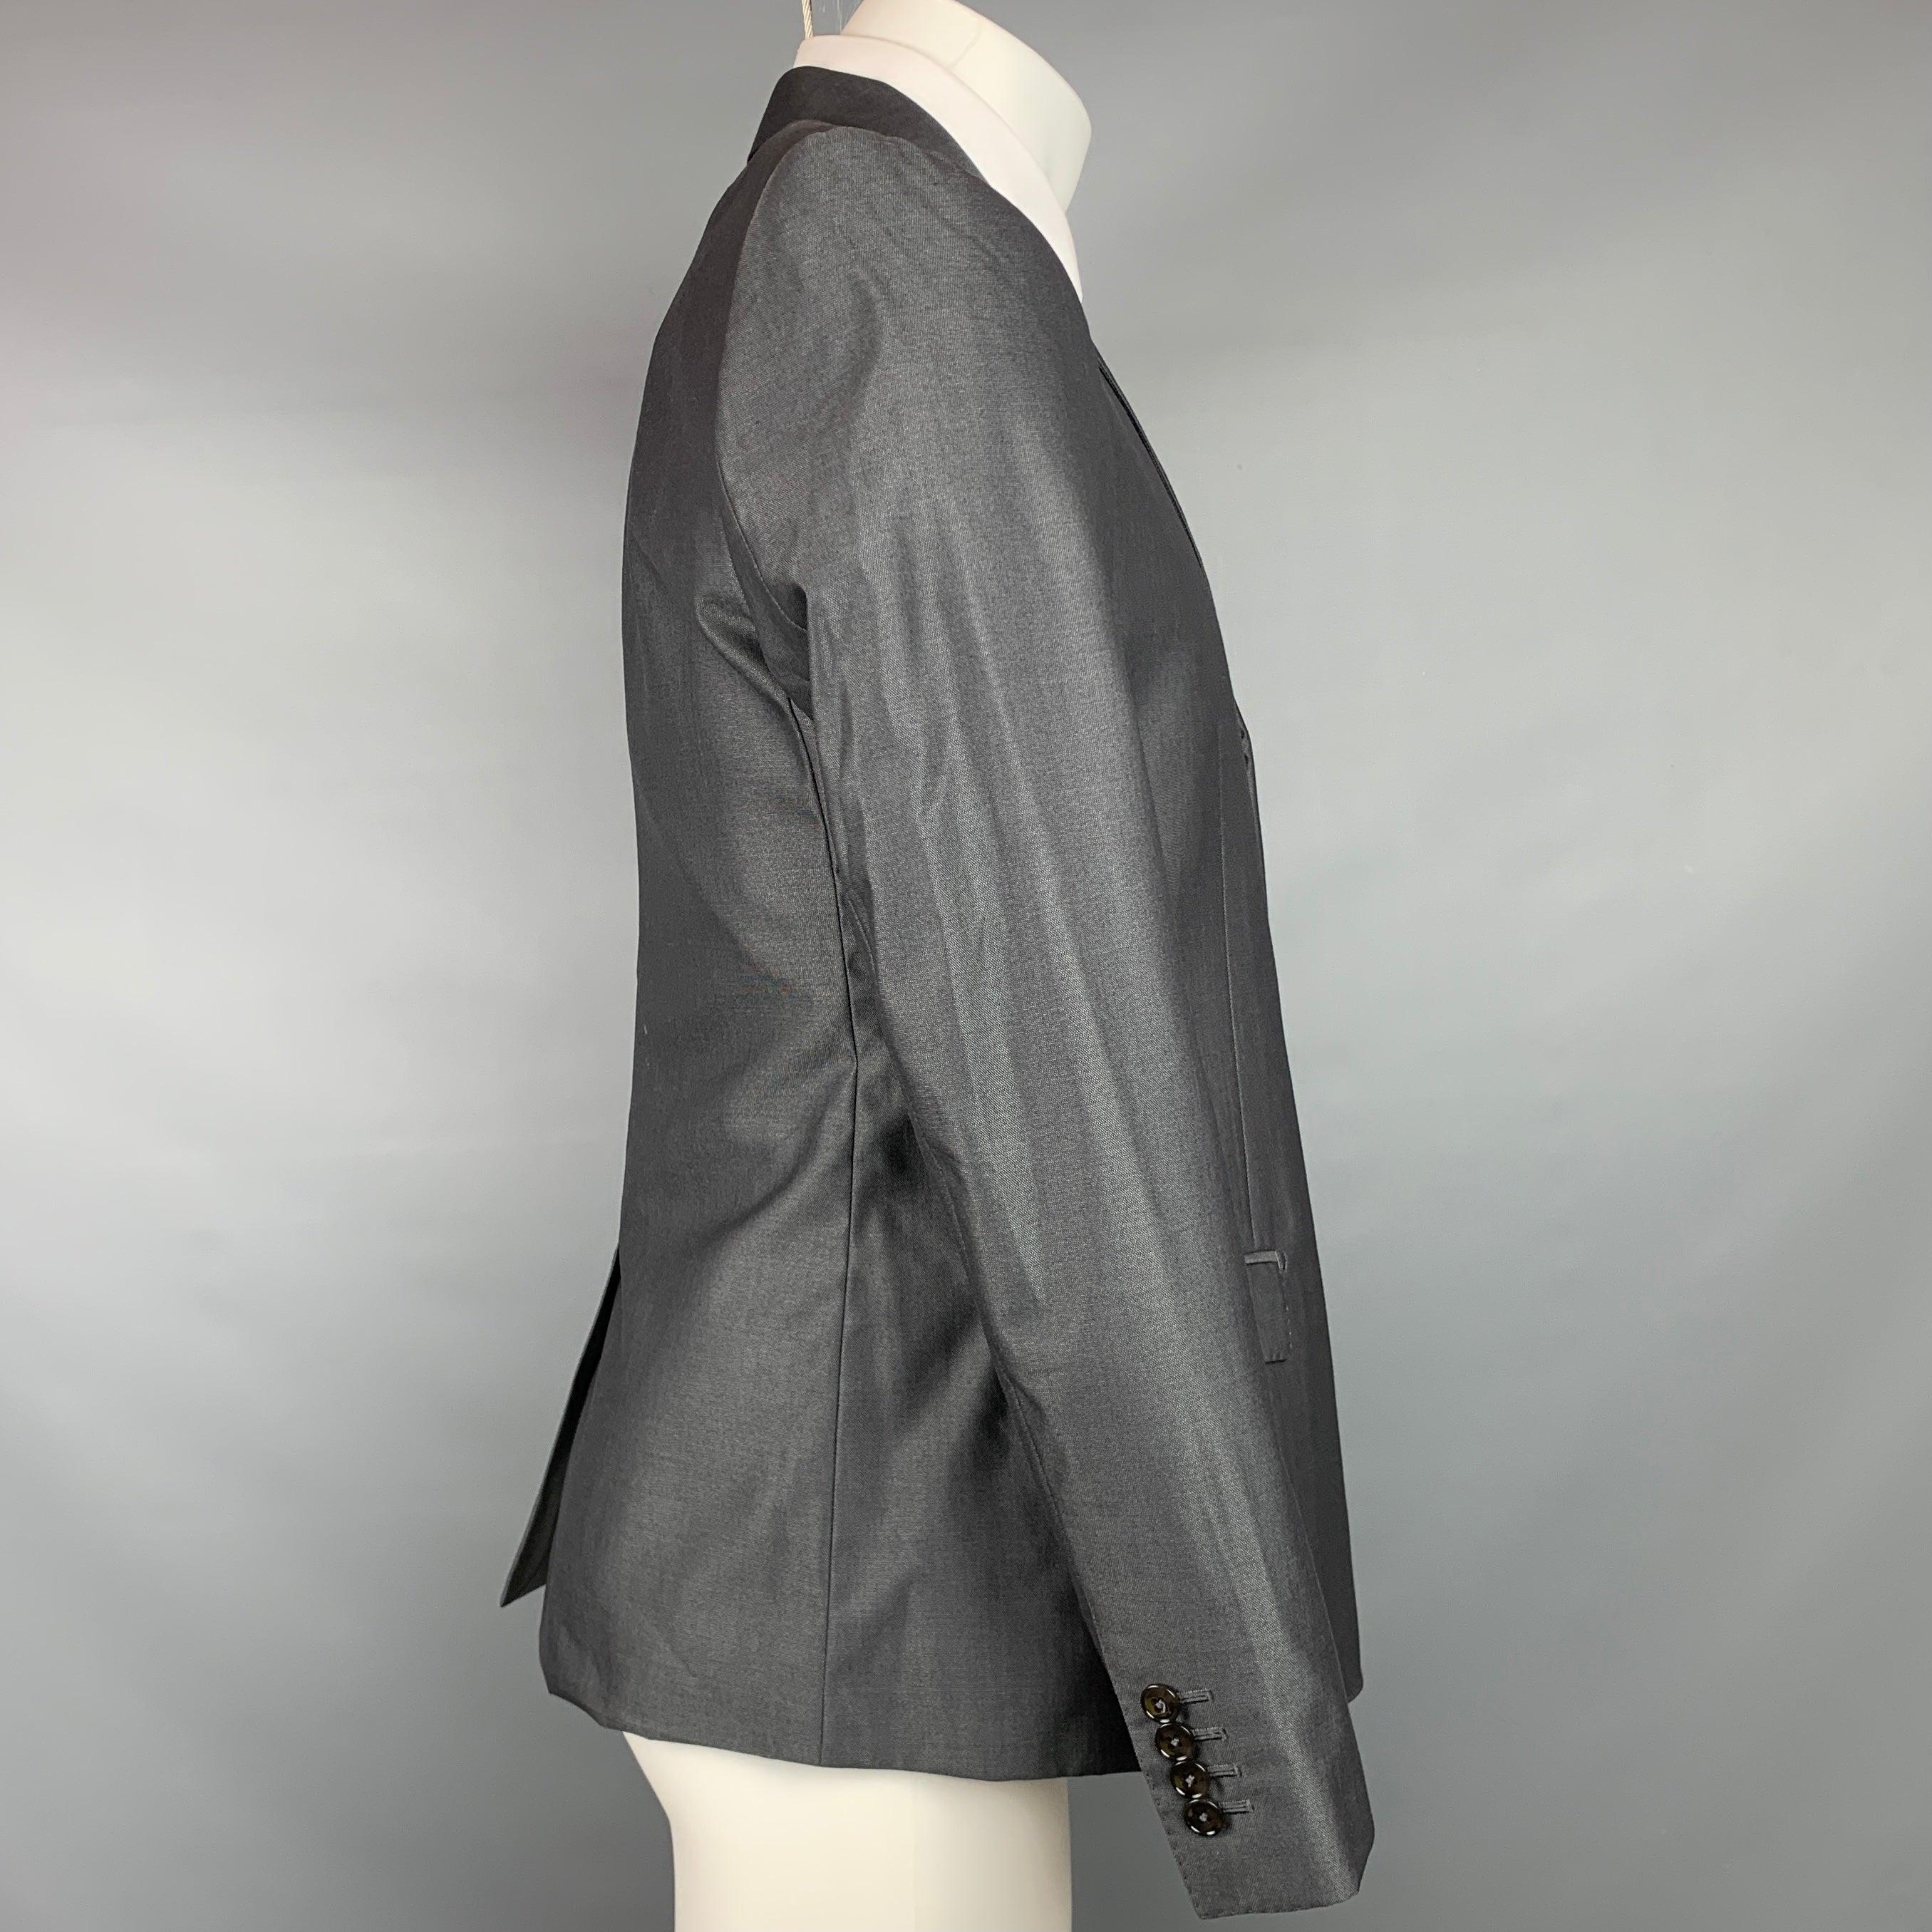 DOLCE & GABBANA Martini Size 38 Charcoal Wool / Silk Peak Lapel Sport Coat In Good Condition For Sale In San Francisco, CA